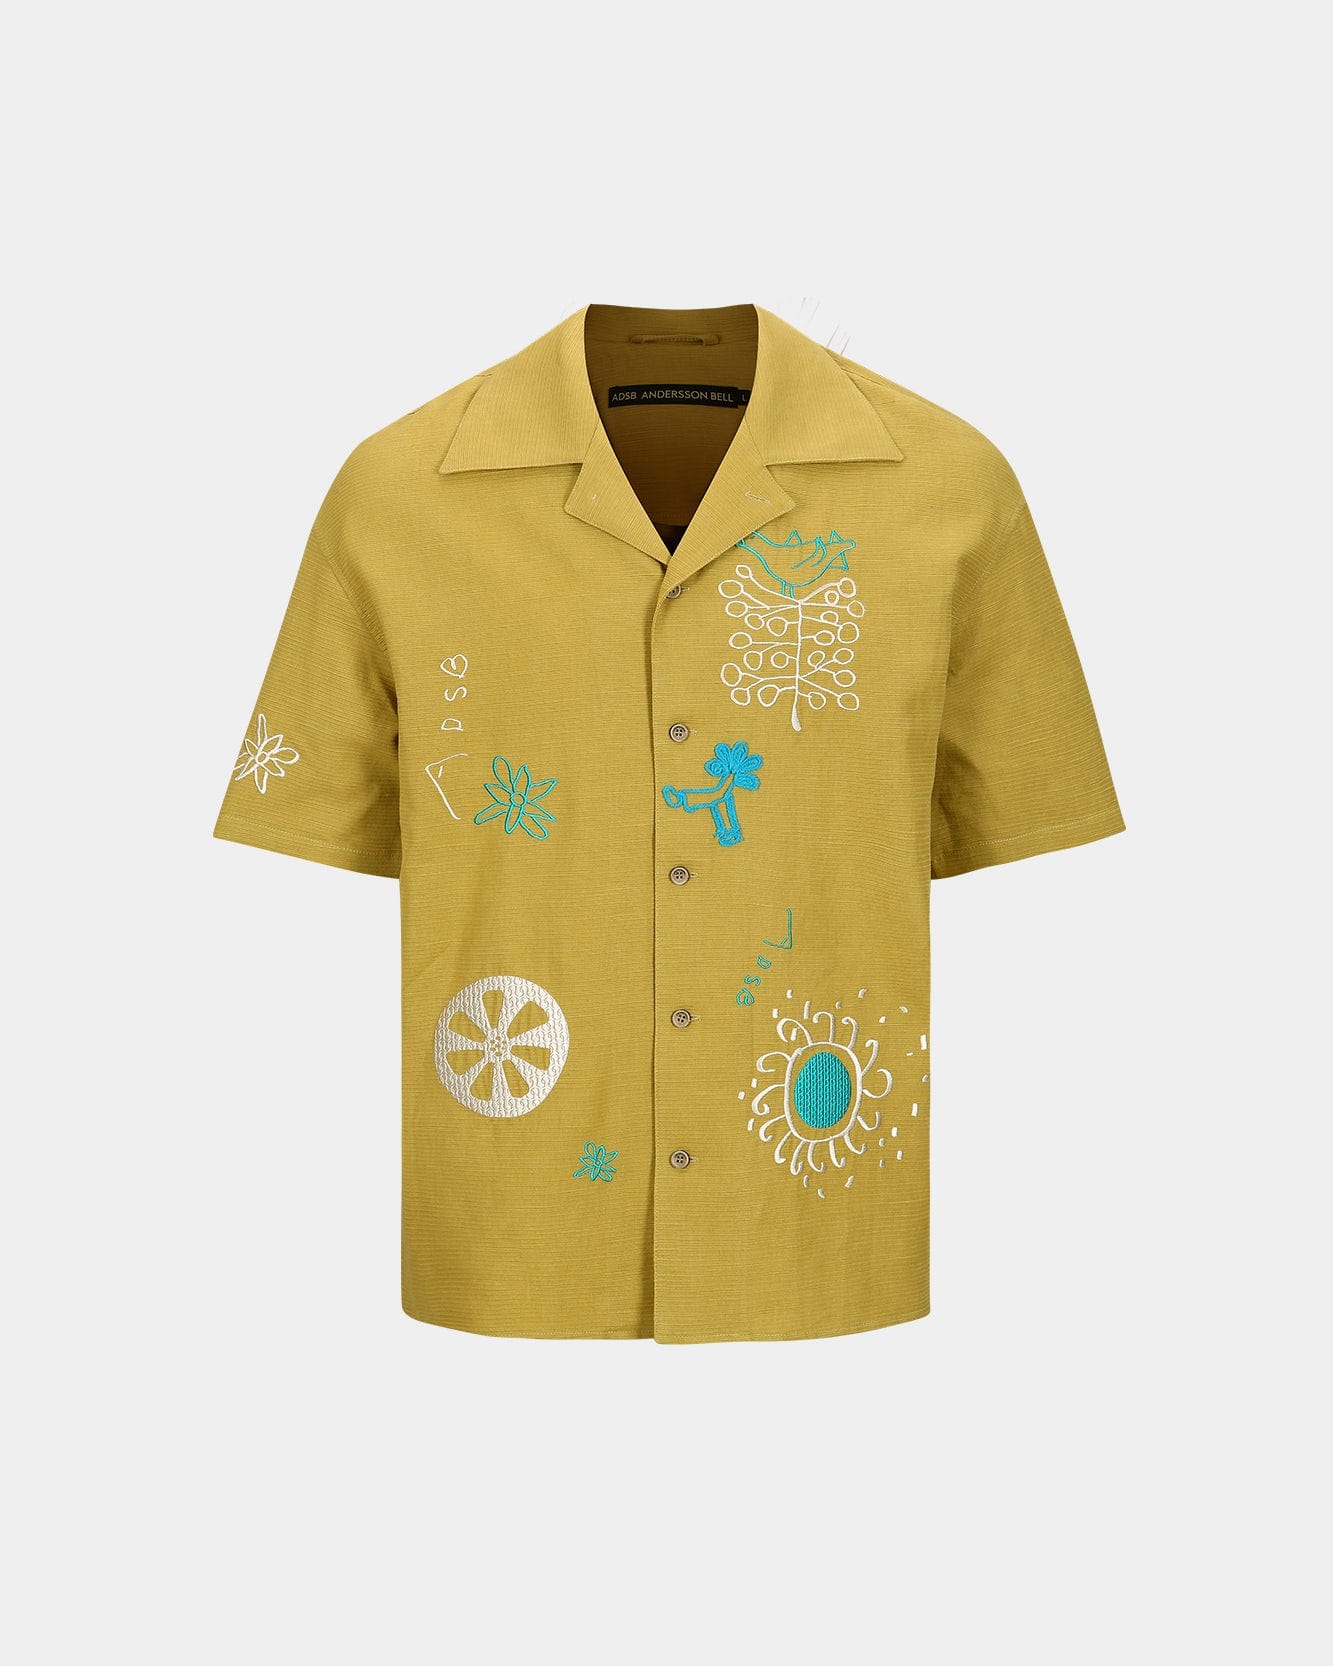 Andersson Bell APRIL EMBROIDERY OPEN COLLAR SHIRTS atb1054m(YELLOW)